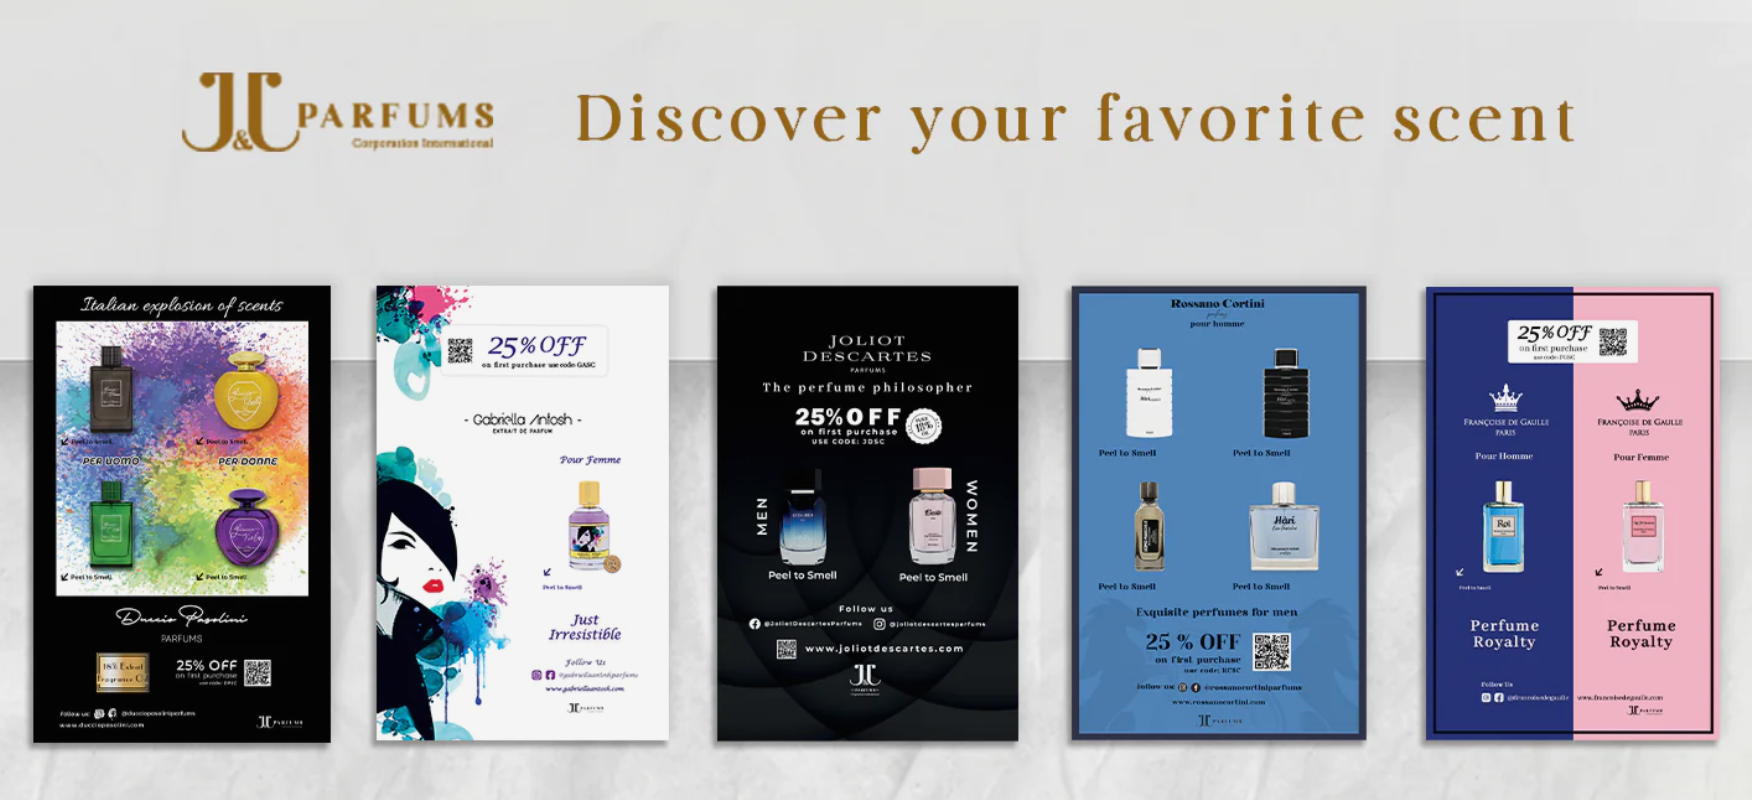 Free Scent Card From JJ Parfums